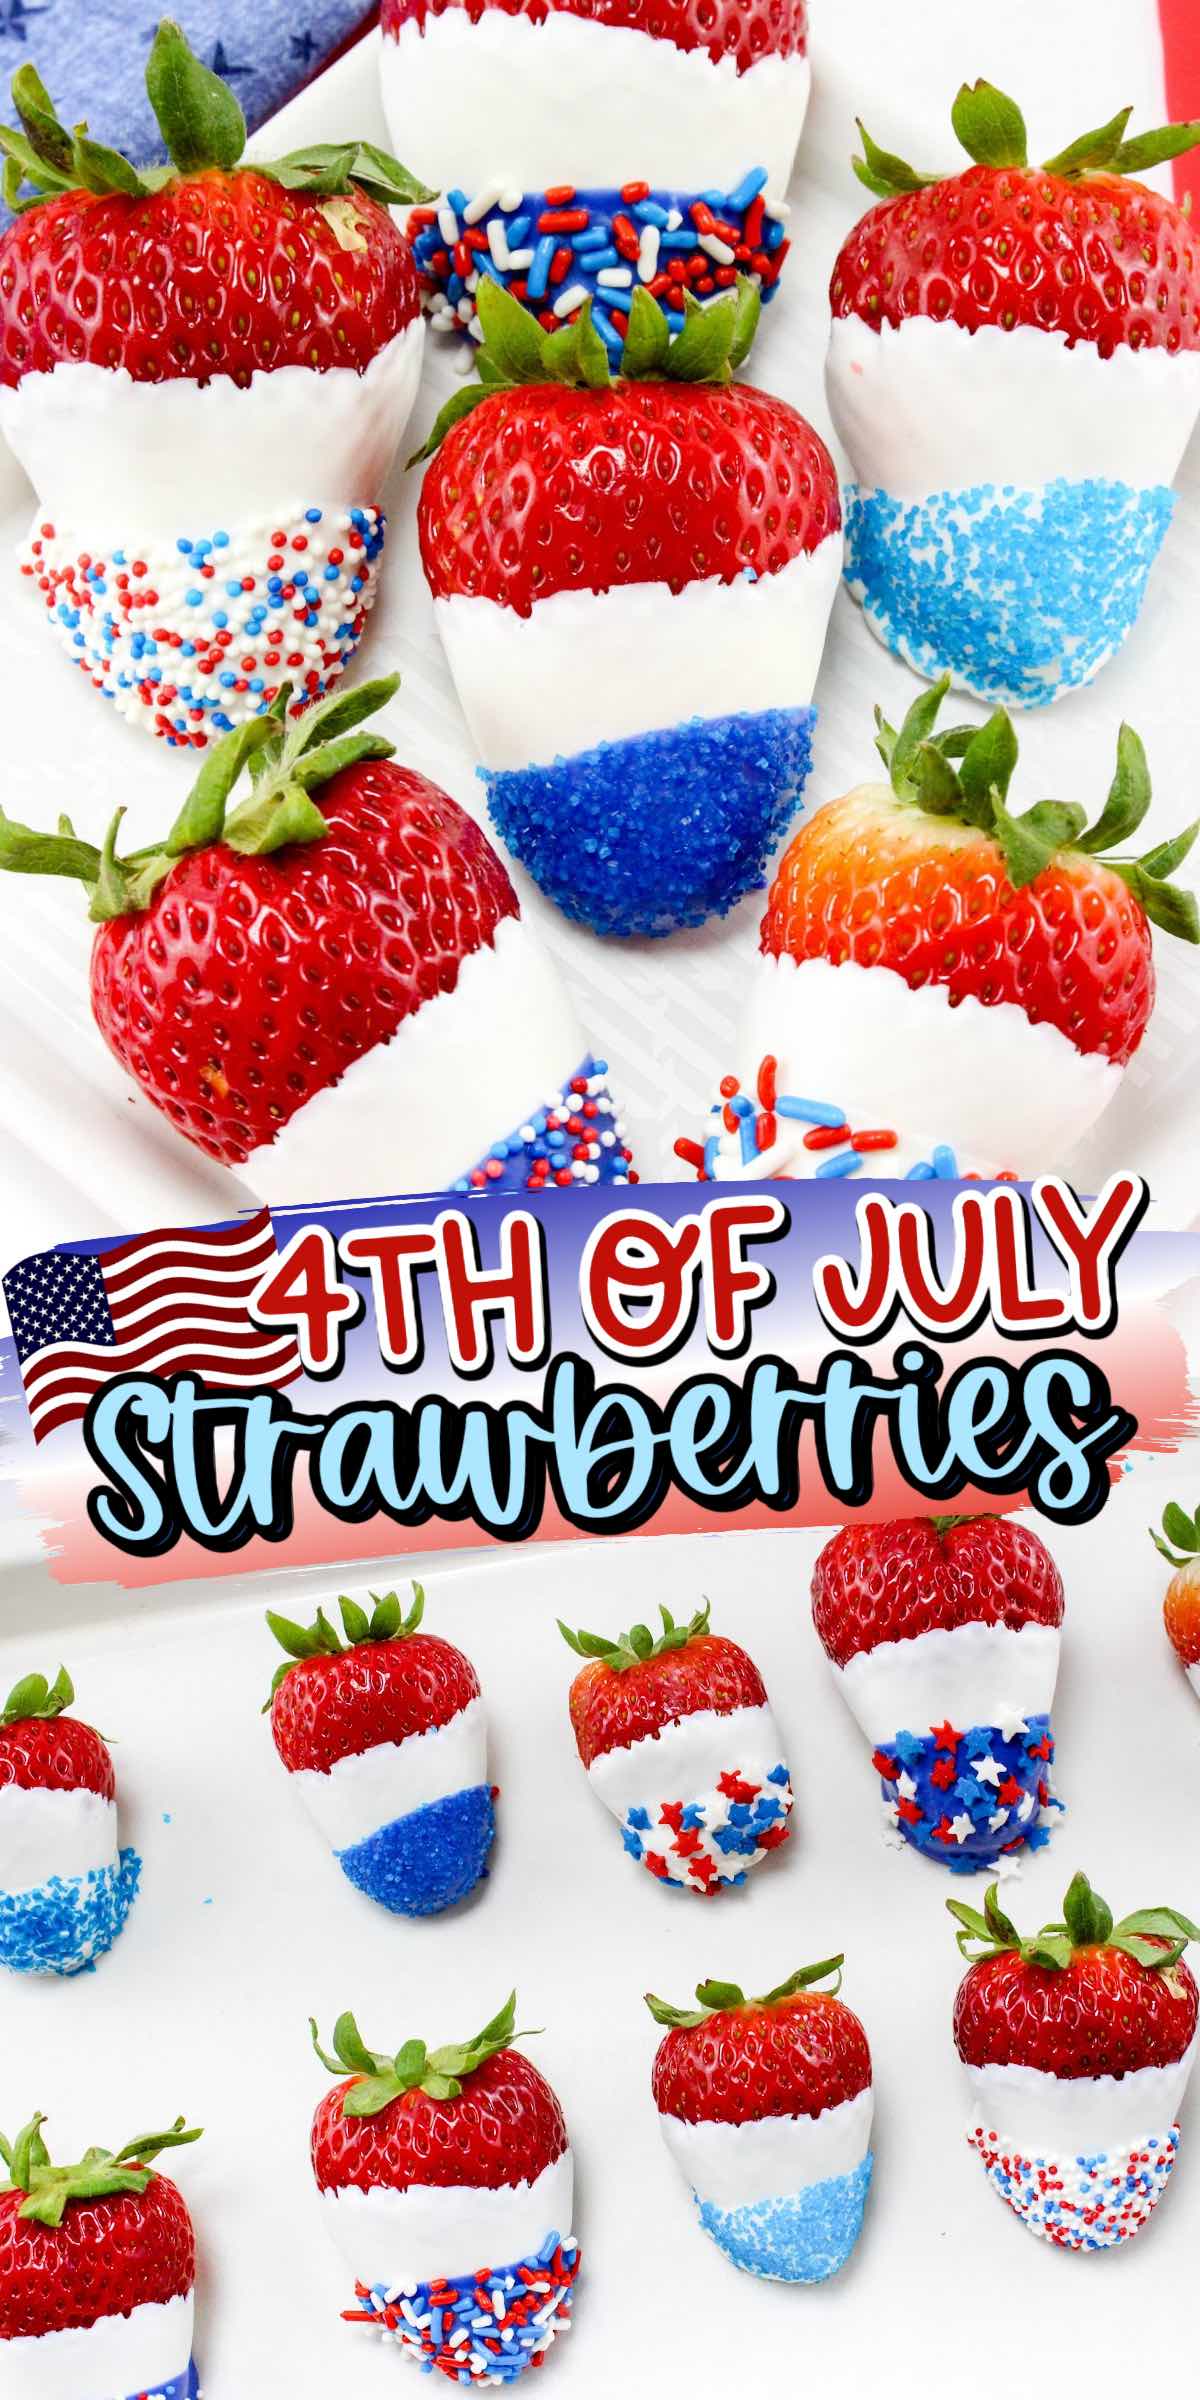 4th of july strawberries